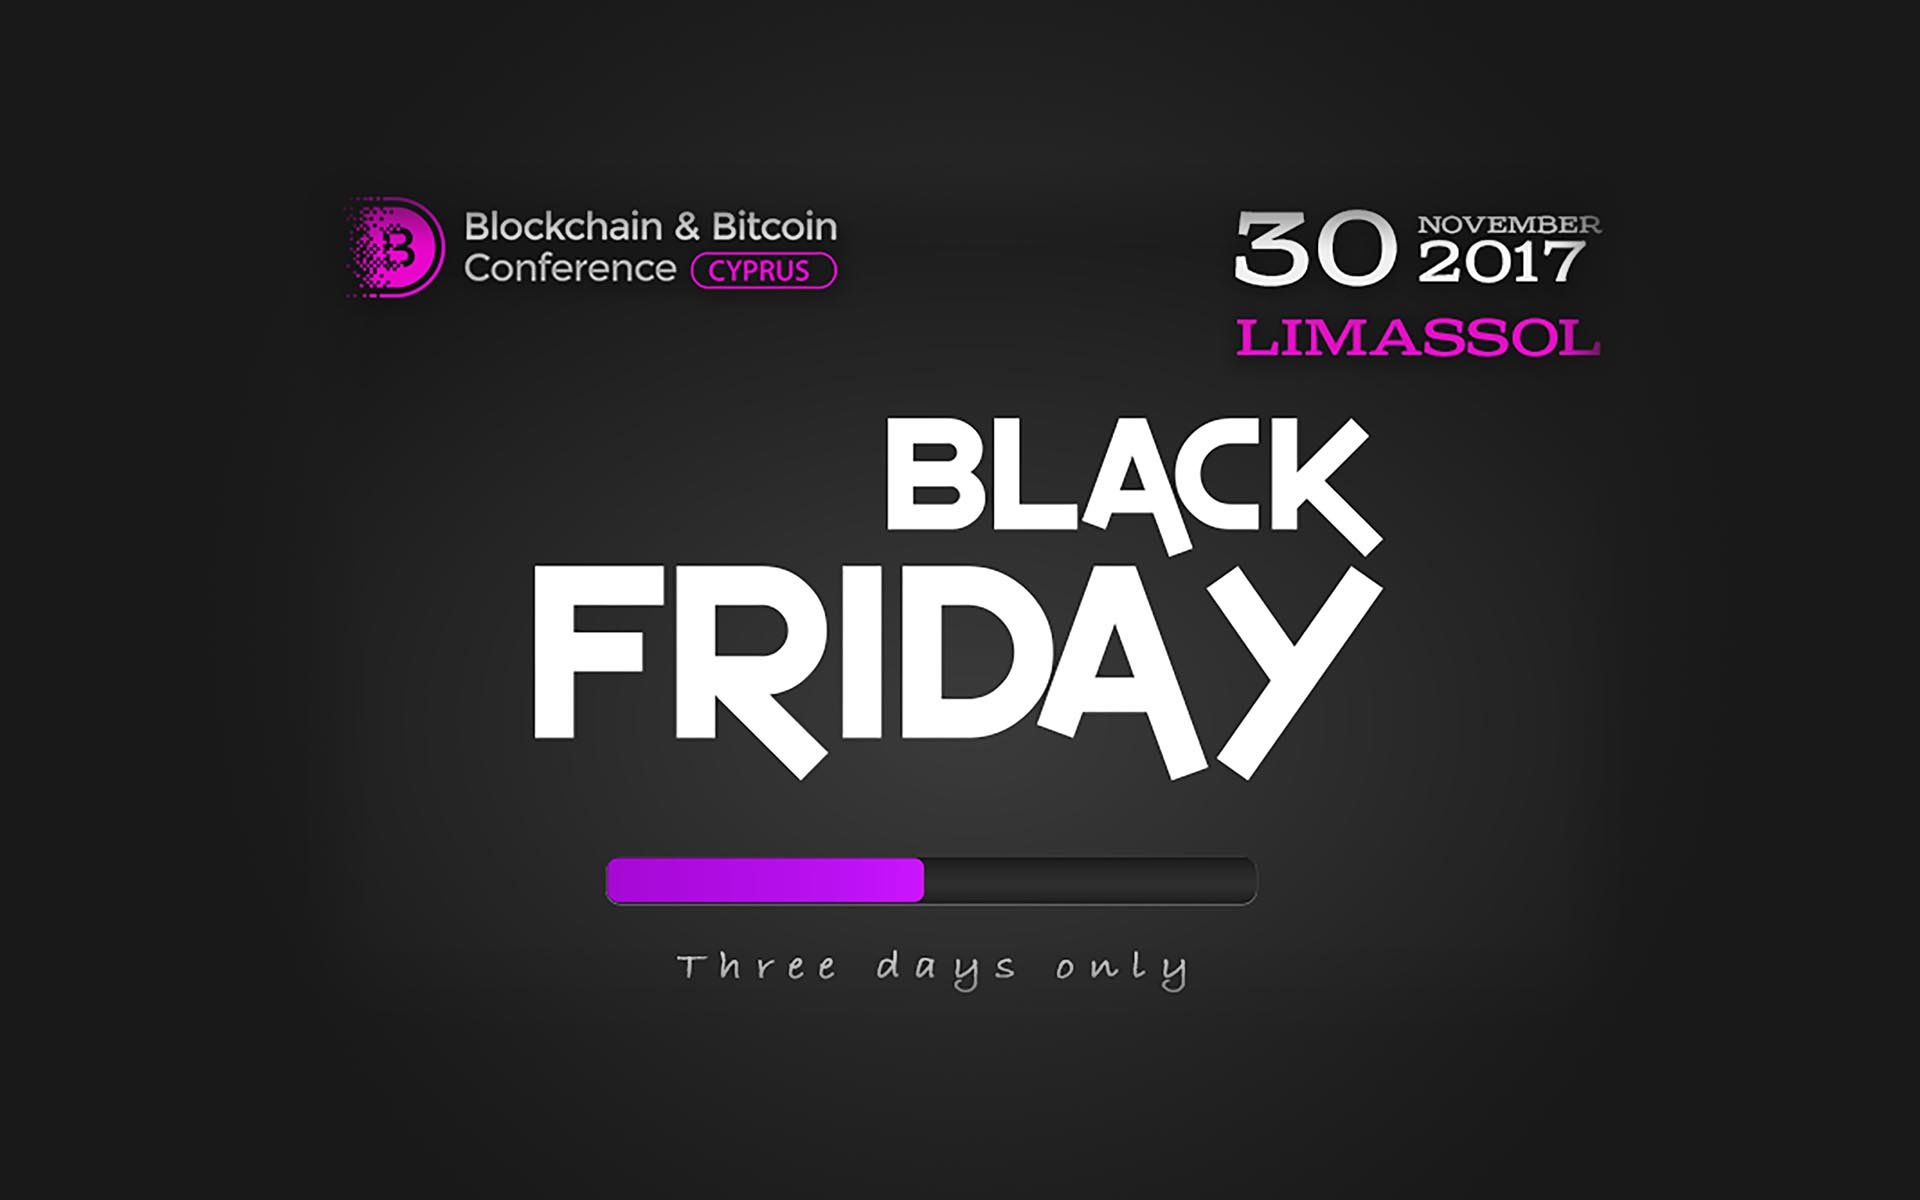 Black Friday Promotion: +1 Free Ticket to Blockchain & Bitcoin Conference Cyprus